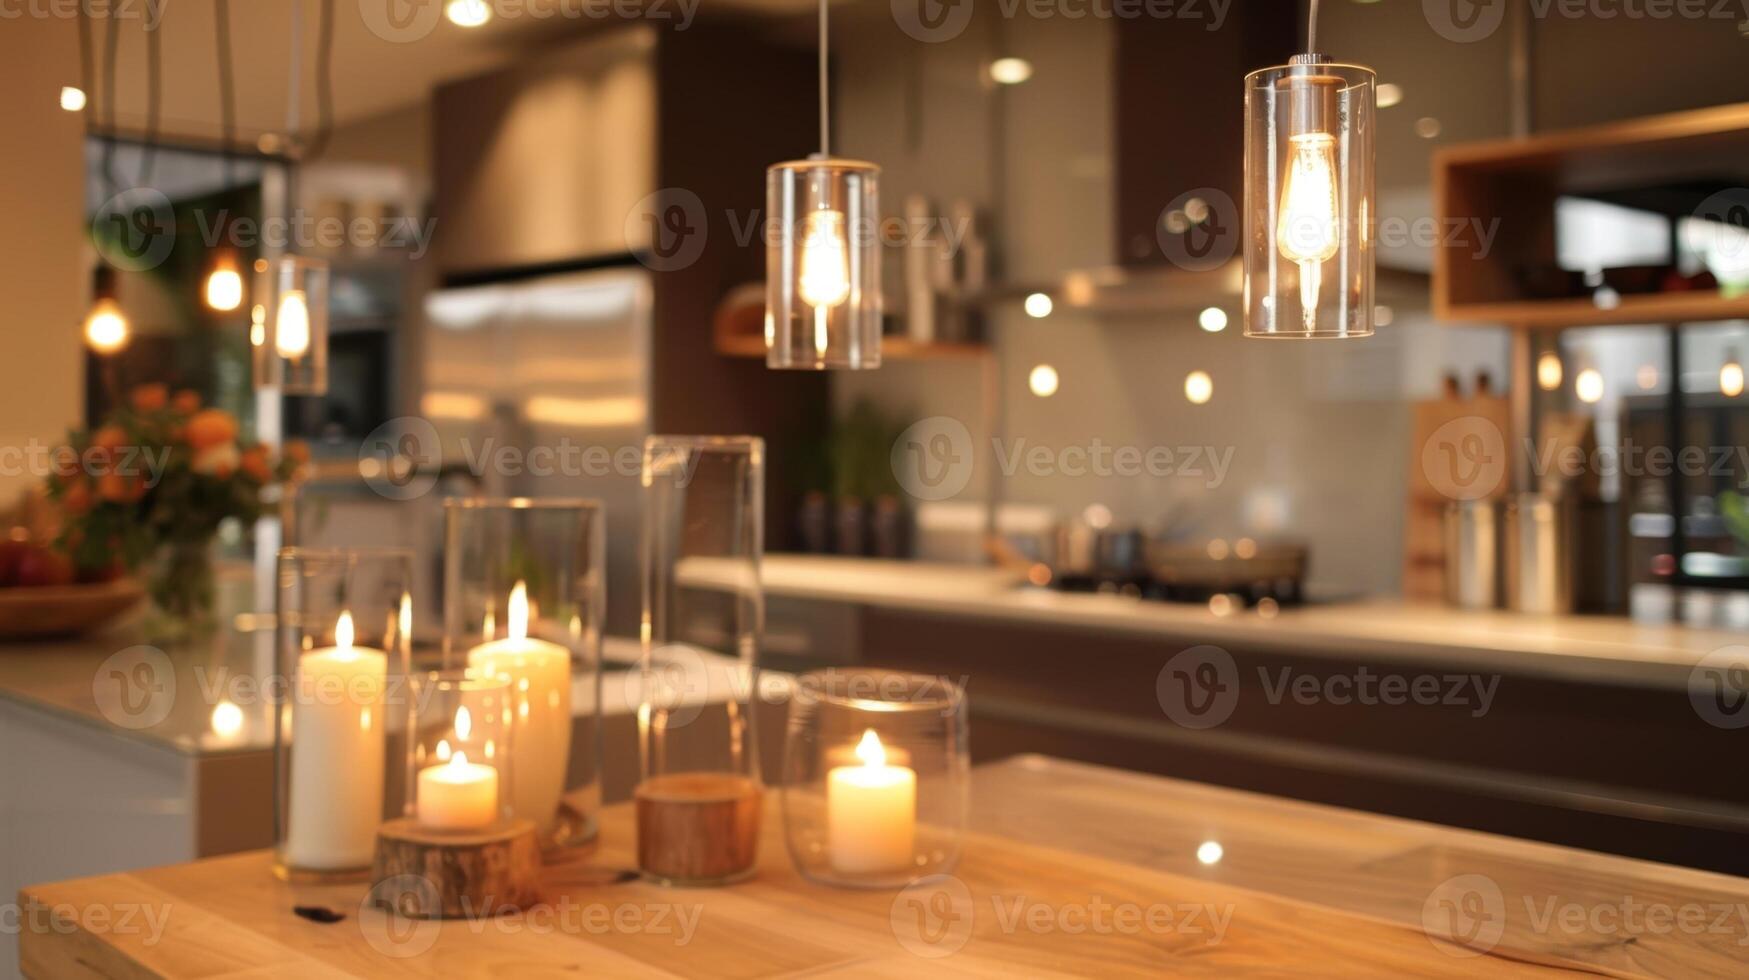 A whimsical touch to a modern kitchen with sleek suspended candles adding a touch of romance to the space. 2d flat cartoon photo